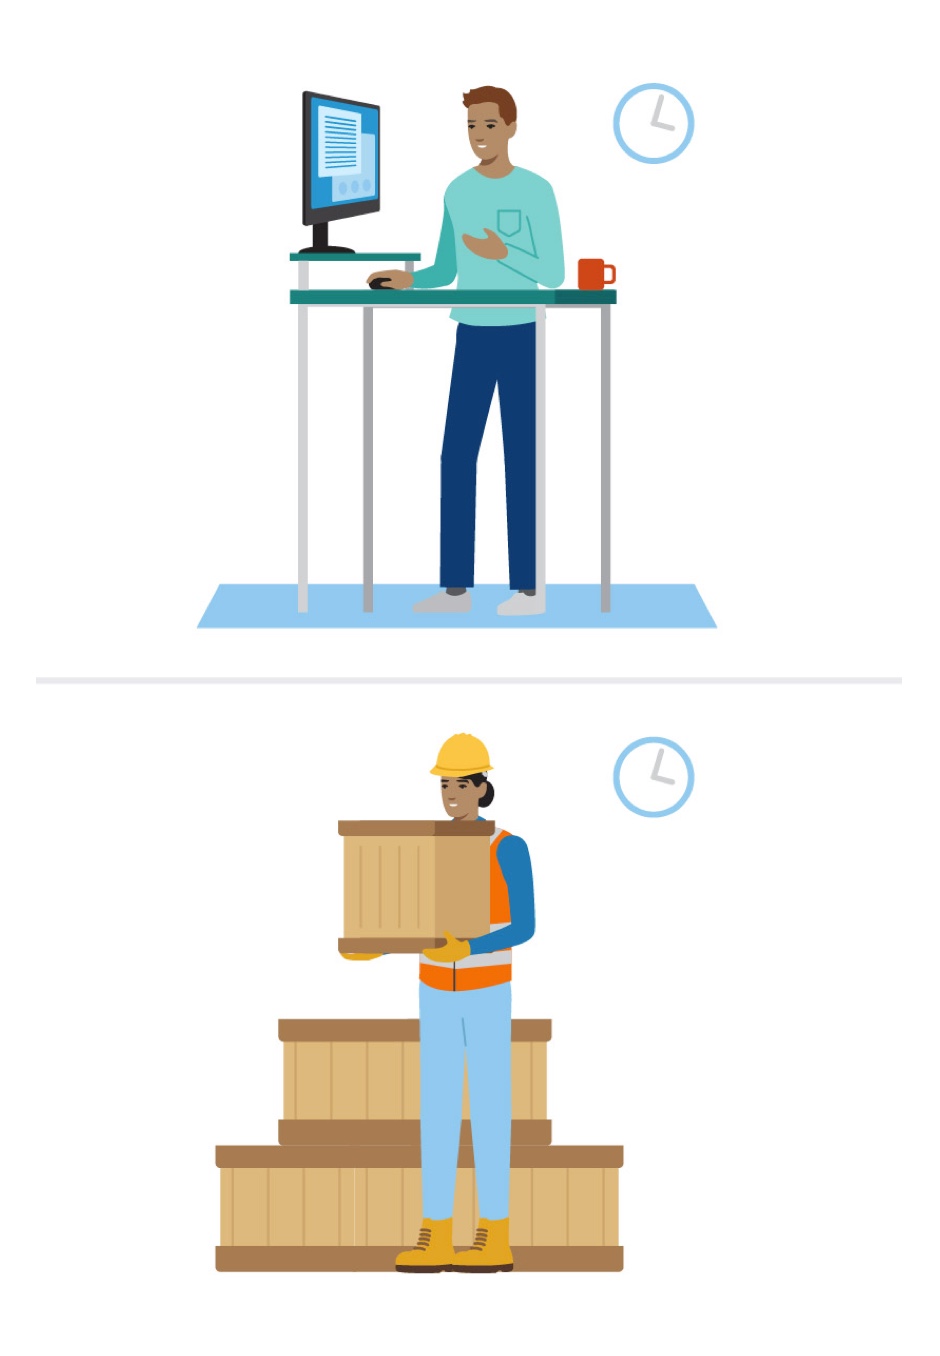 In one half of the image, a man works at a standing desk. In the other half, a woman with a hard hat carries a box.